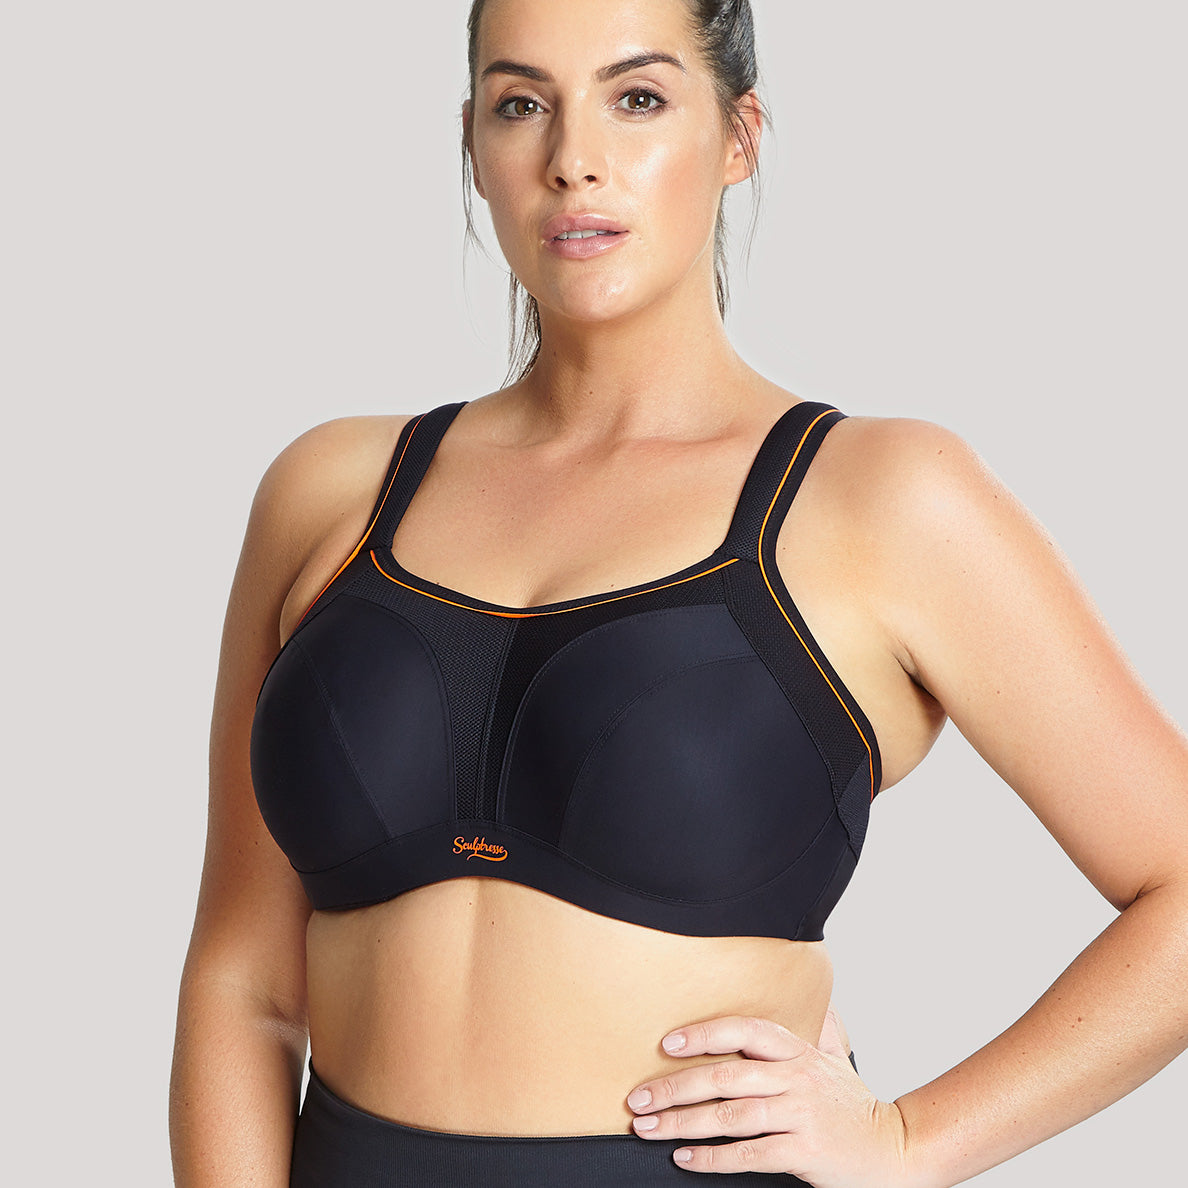 If your breasts are different sizes, how do you fit a sports bra? –  SportsBra